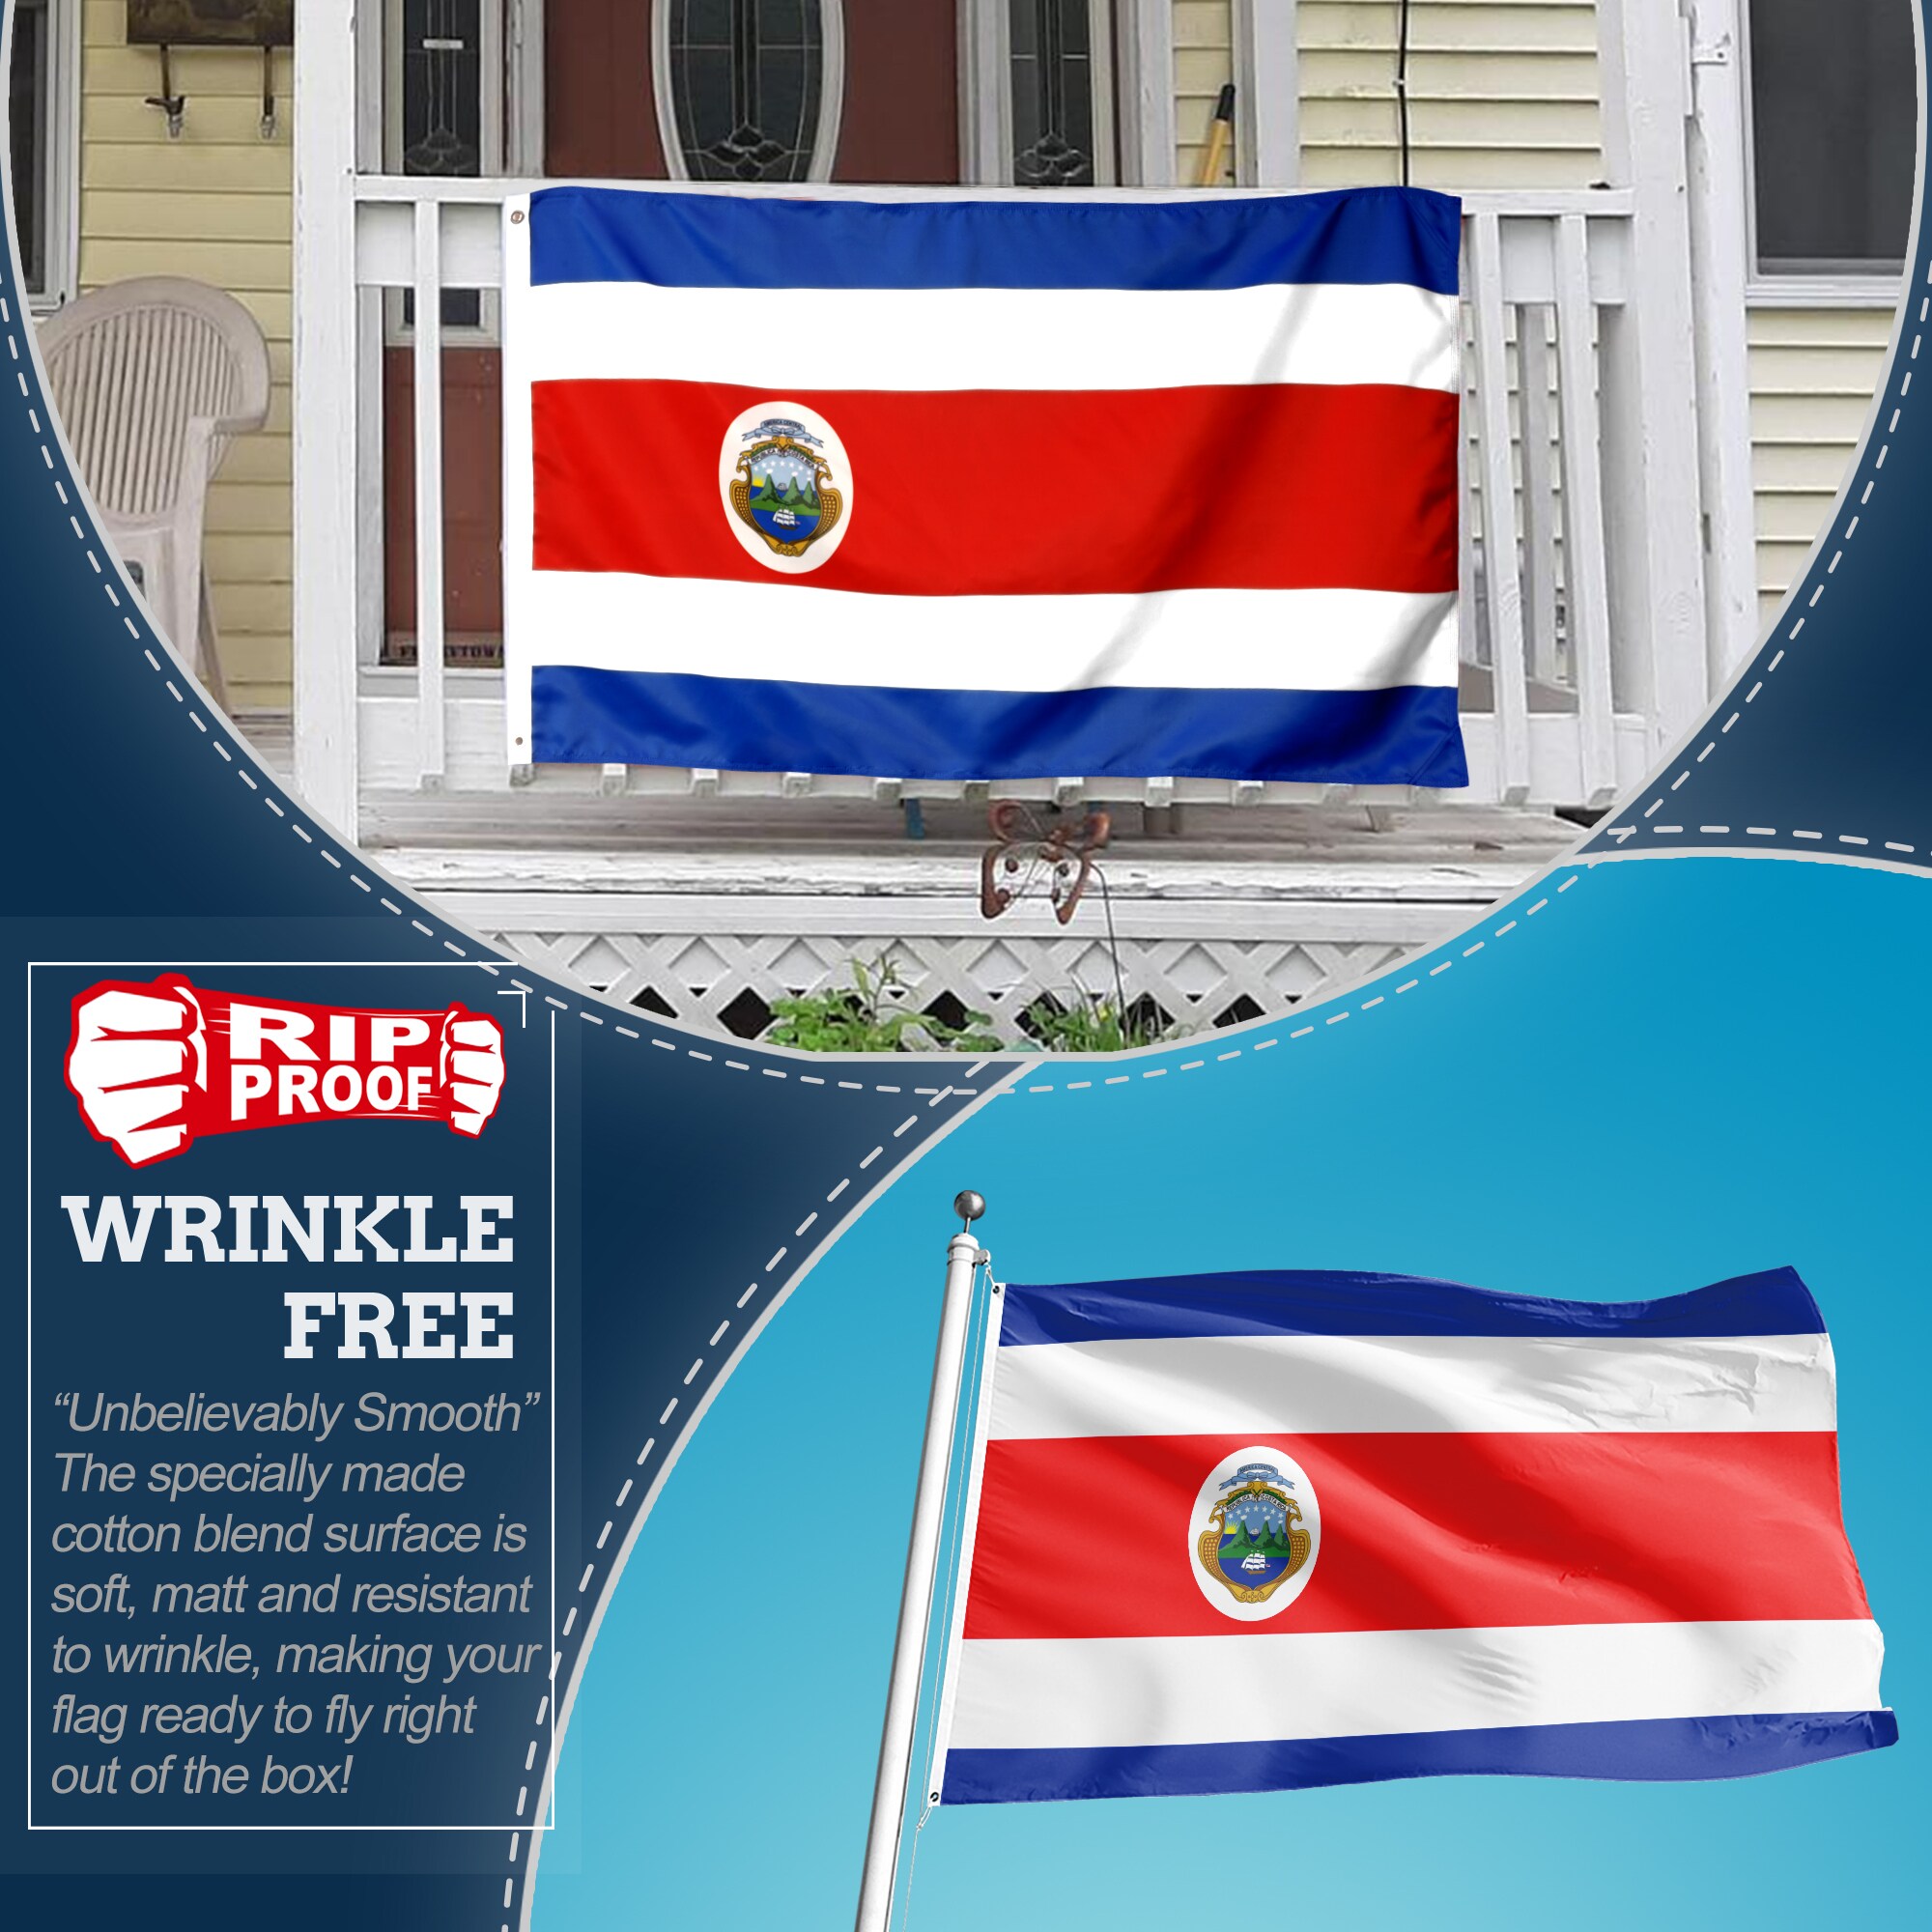 Anley 3' x 5' Rip-Proof Technology Double Sided 3-Ply Costa Rica Flag